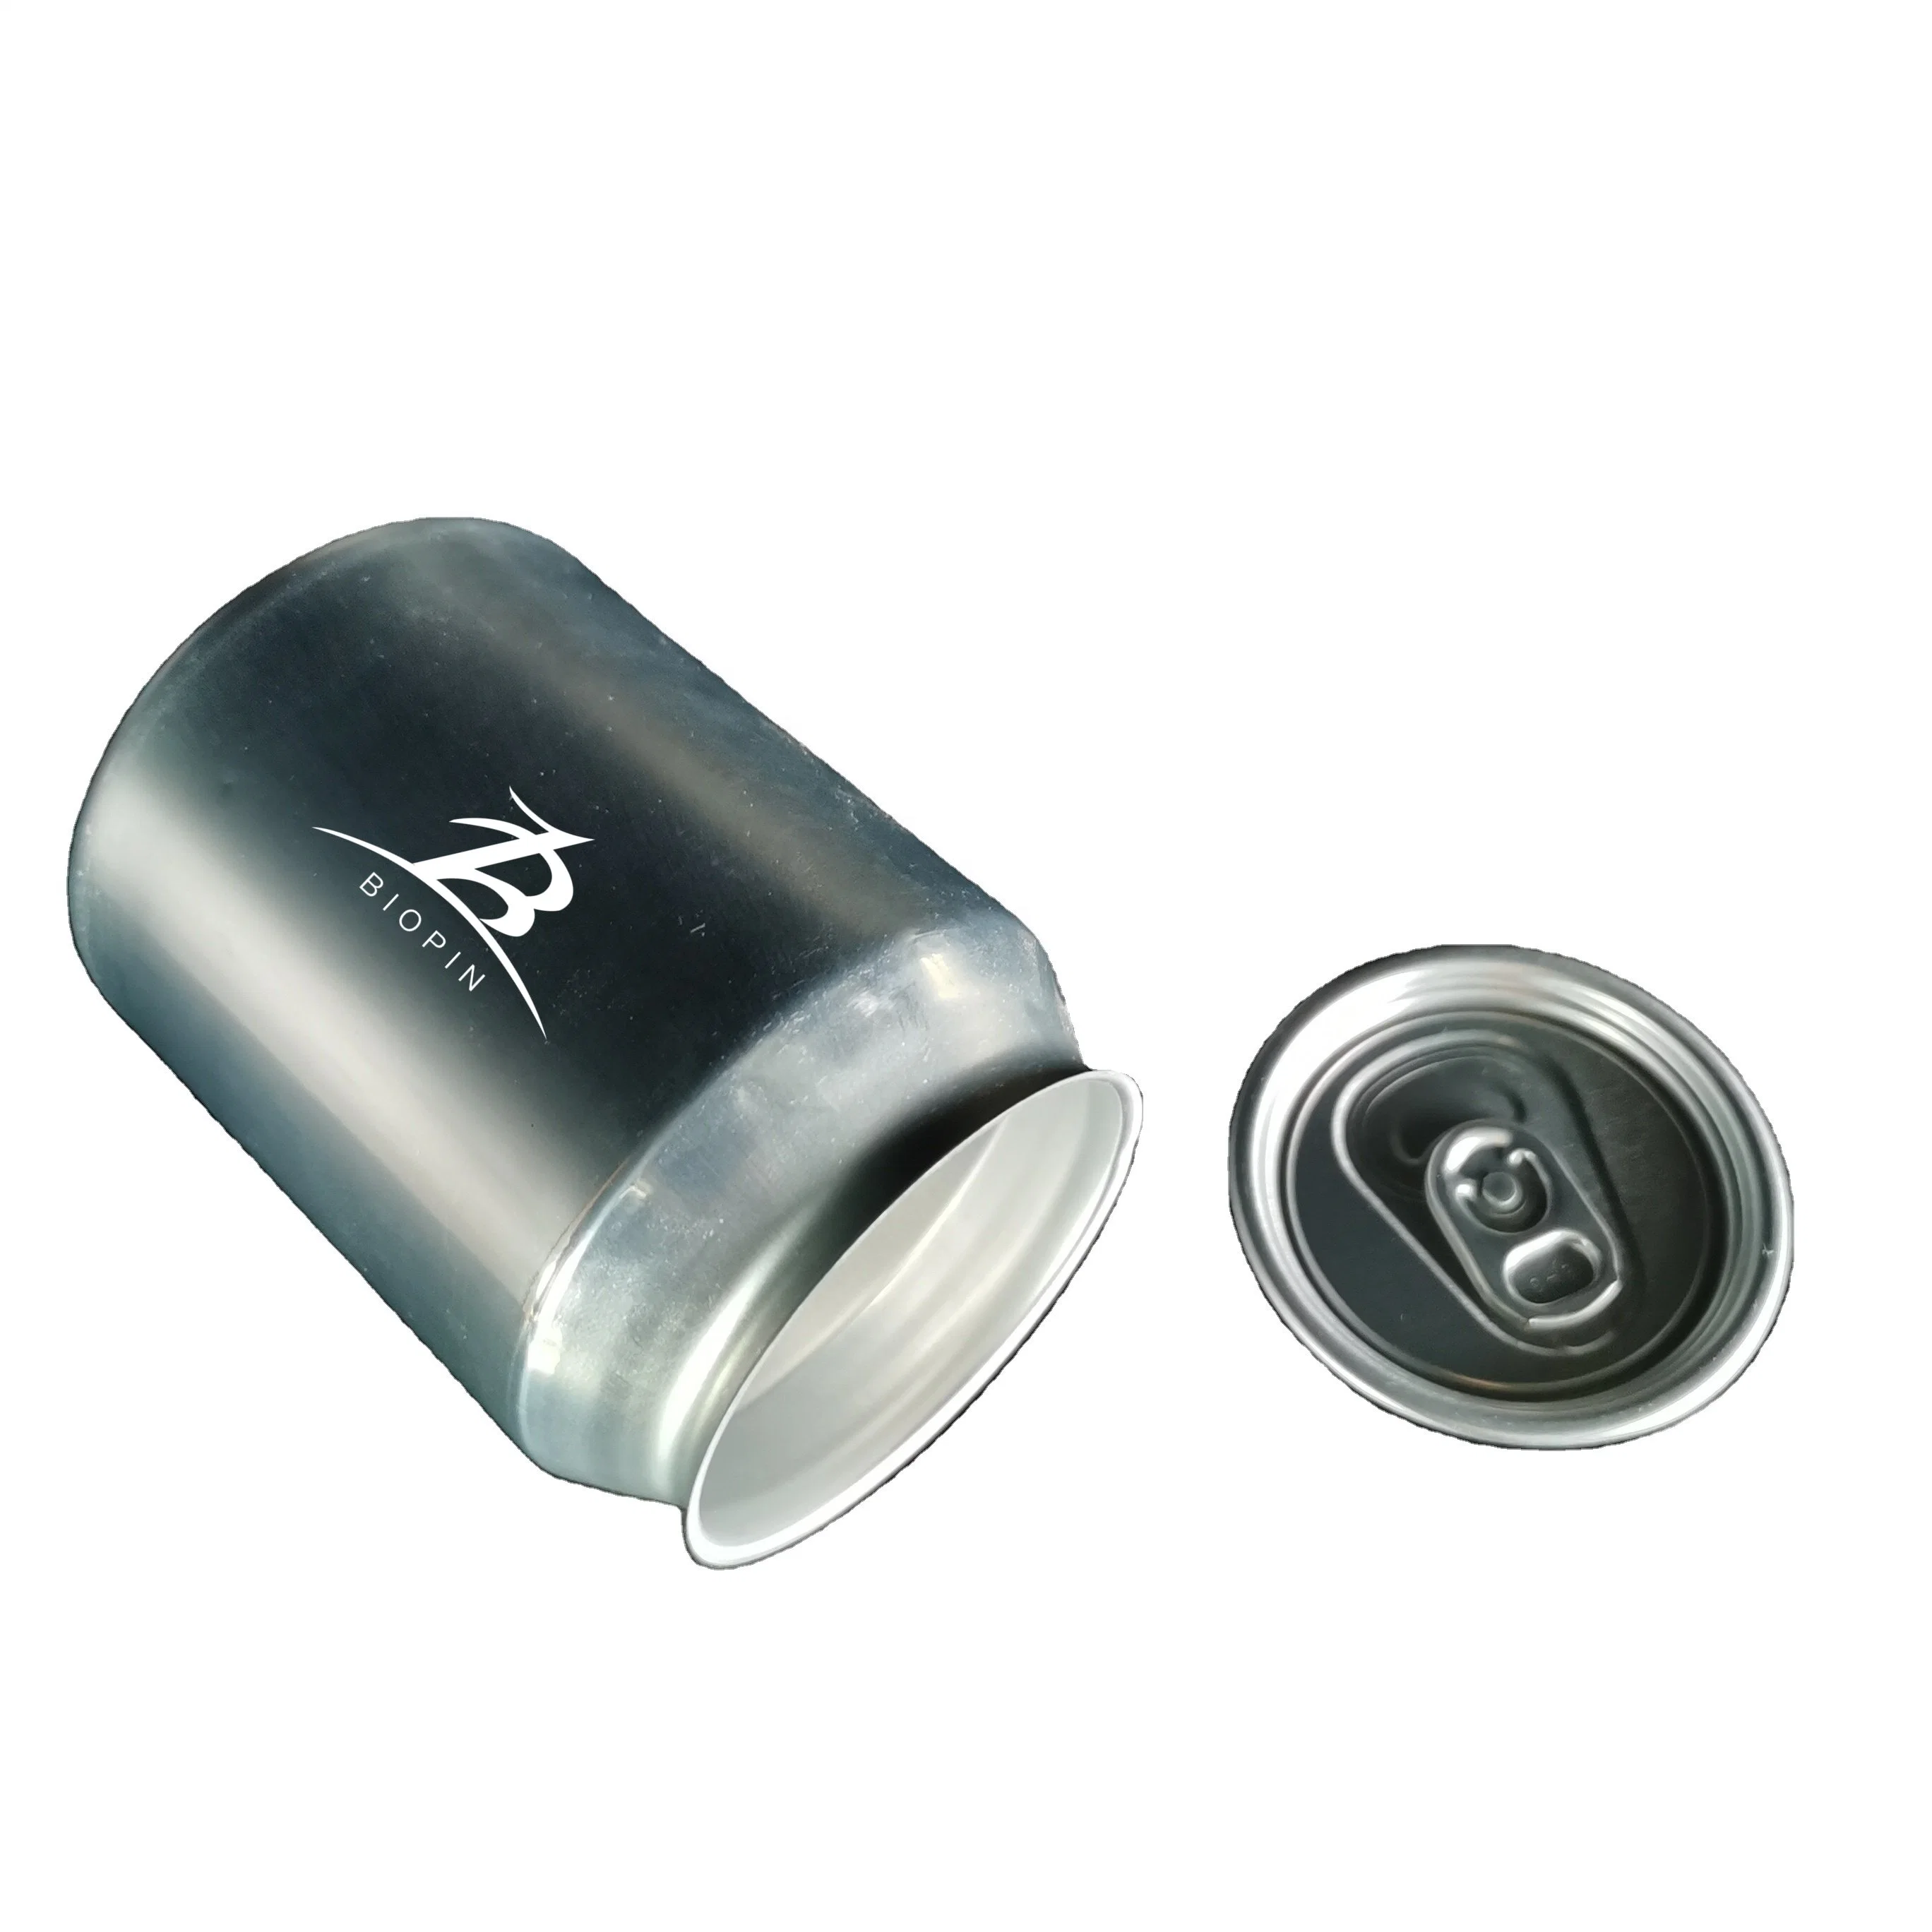 250ml Standard Aluminum Can and Lid for Drinks Packaging Container